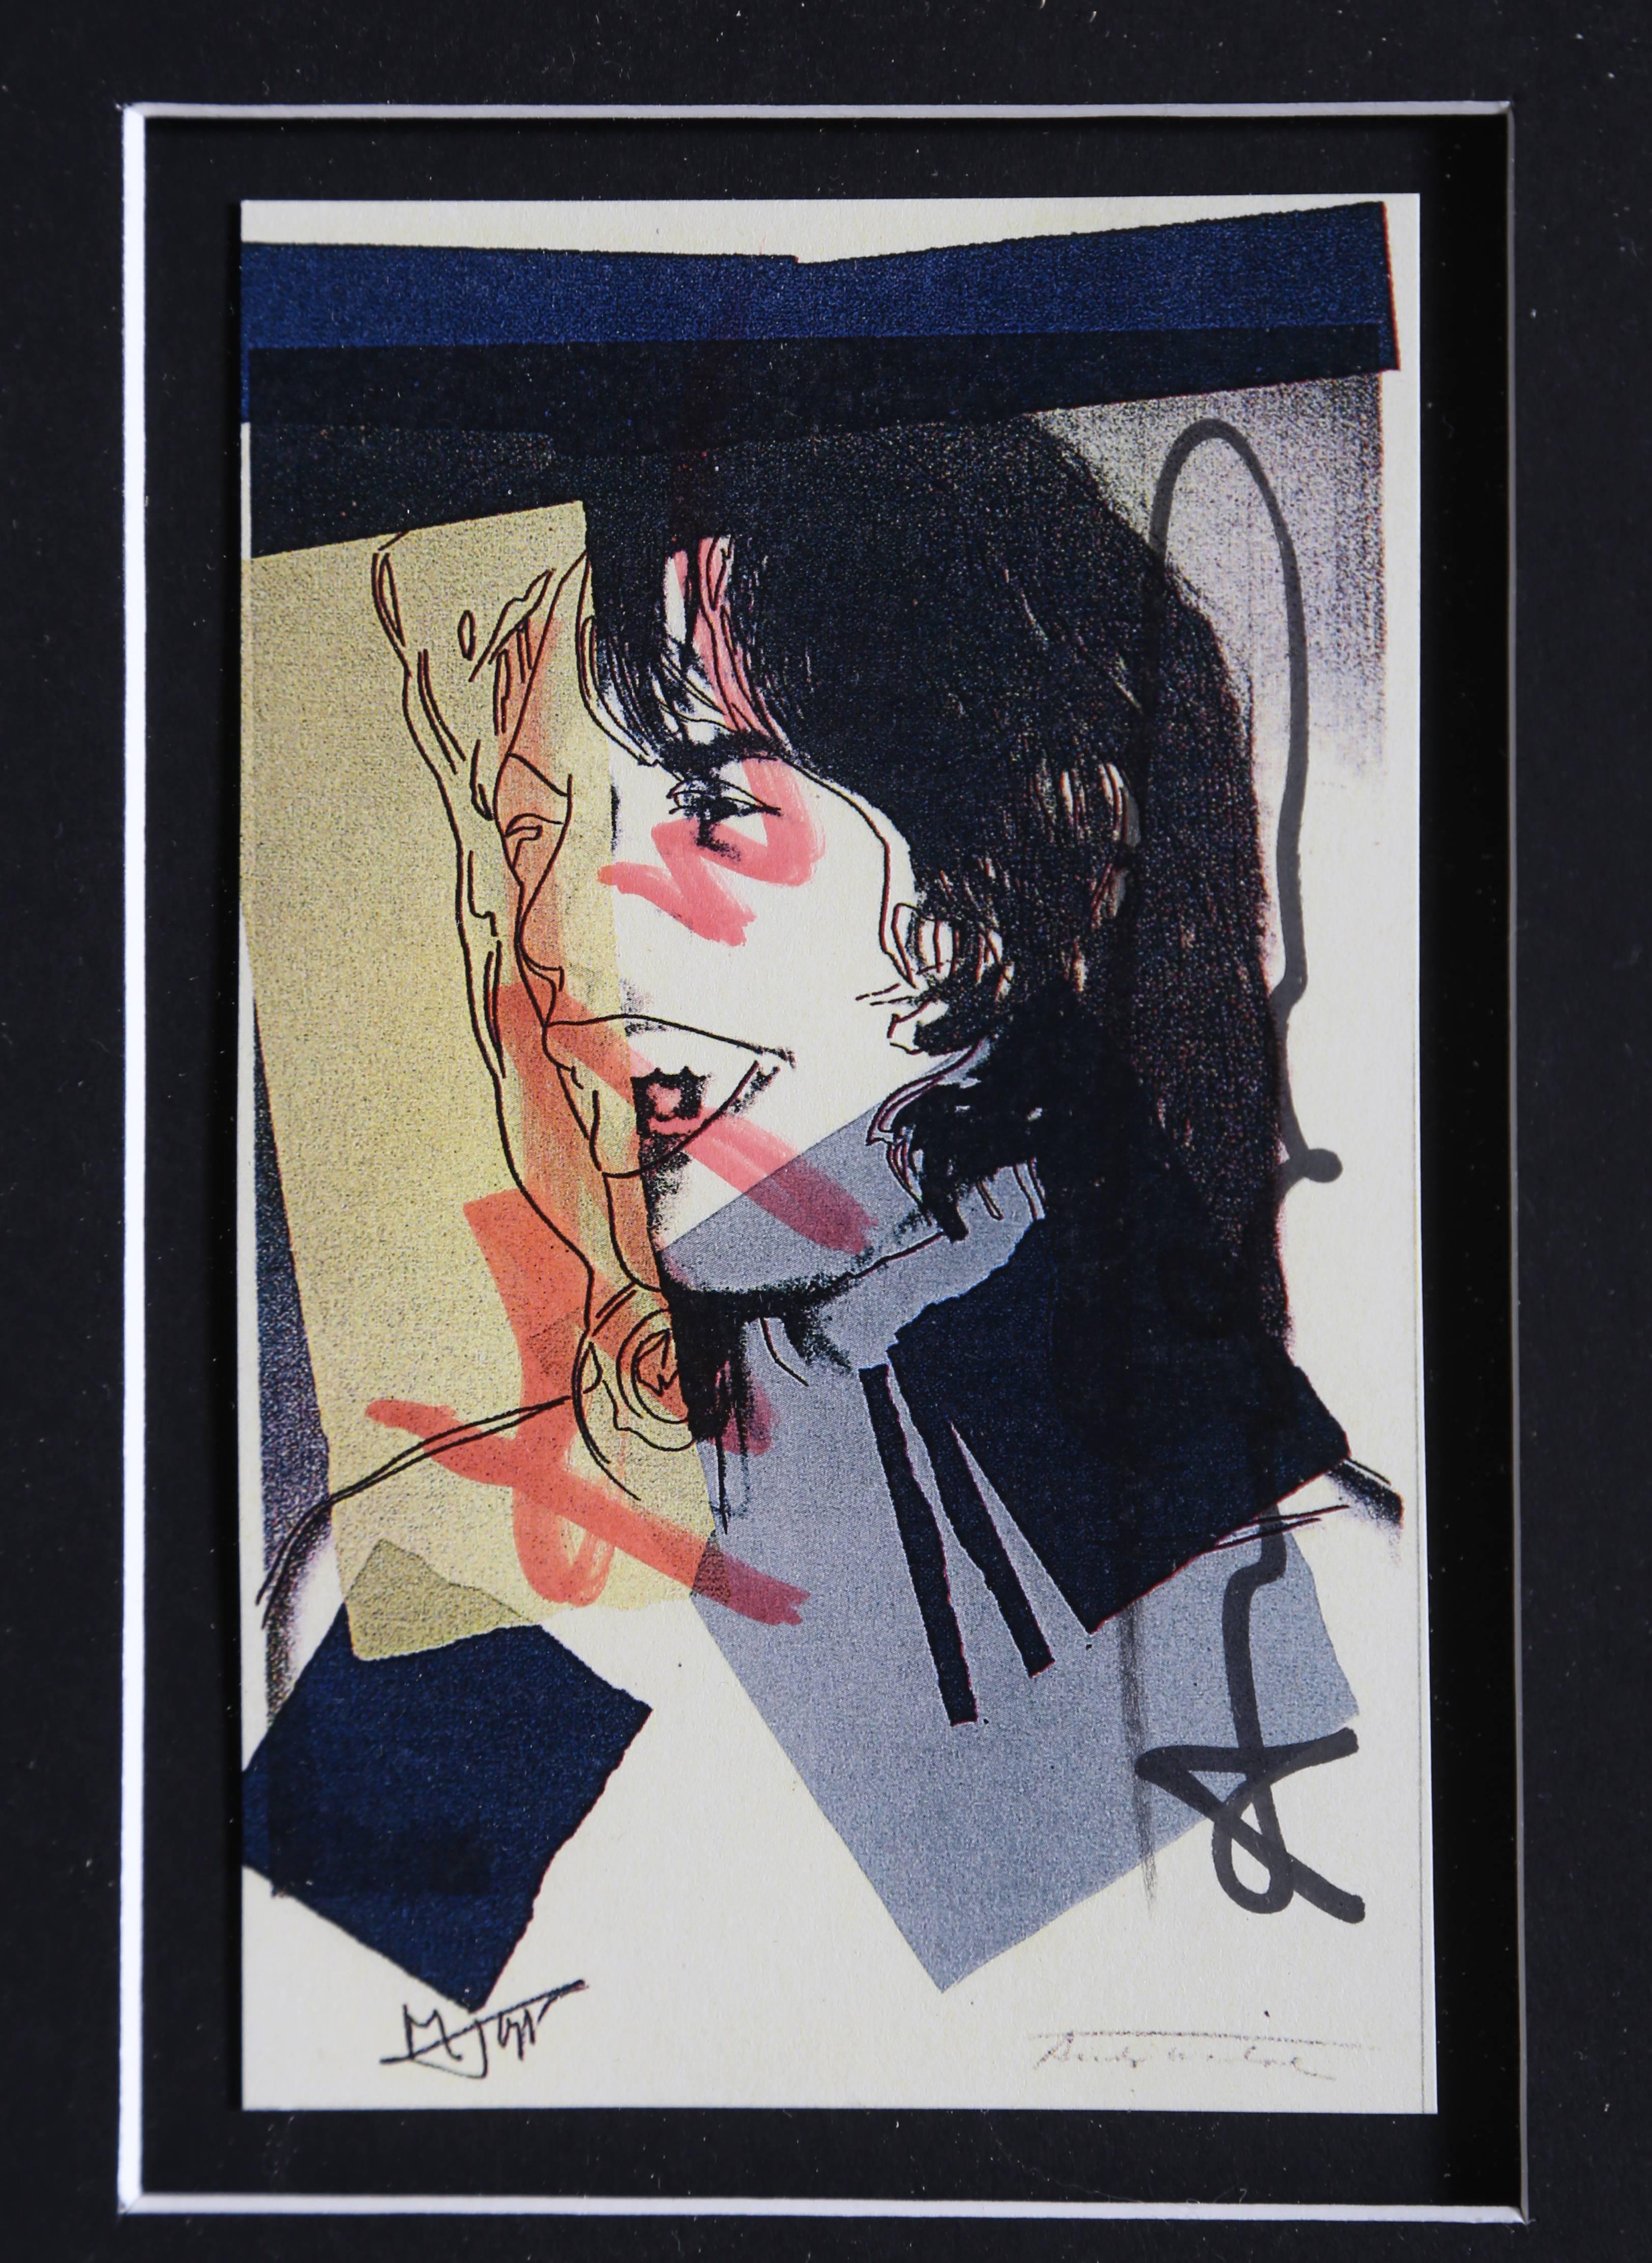 Mick Jagger Announcement Card Portfolio - Print by (after) Andy Warhol